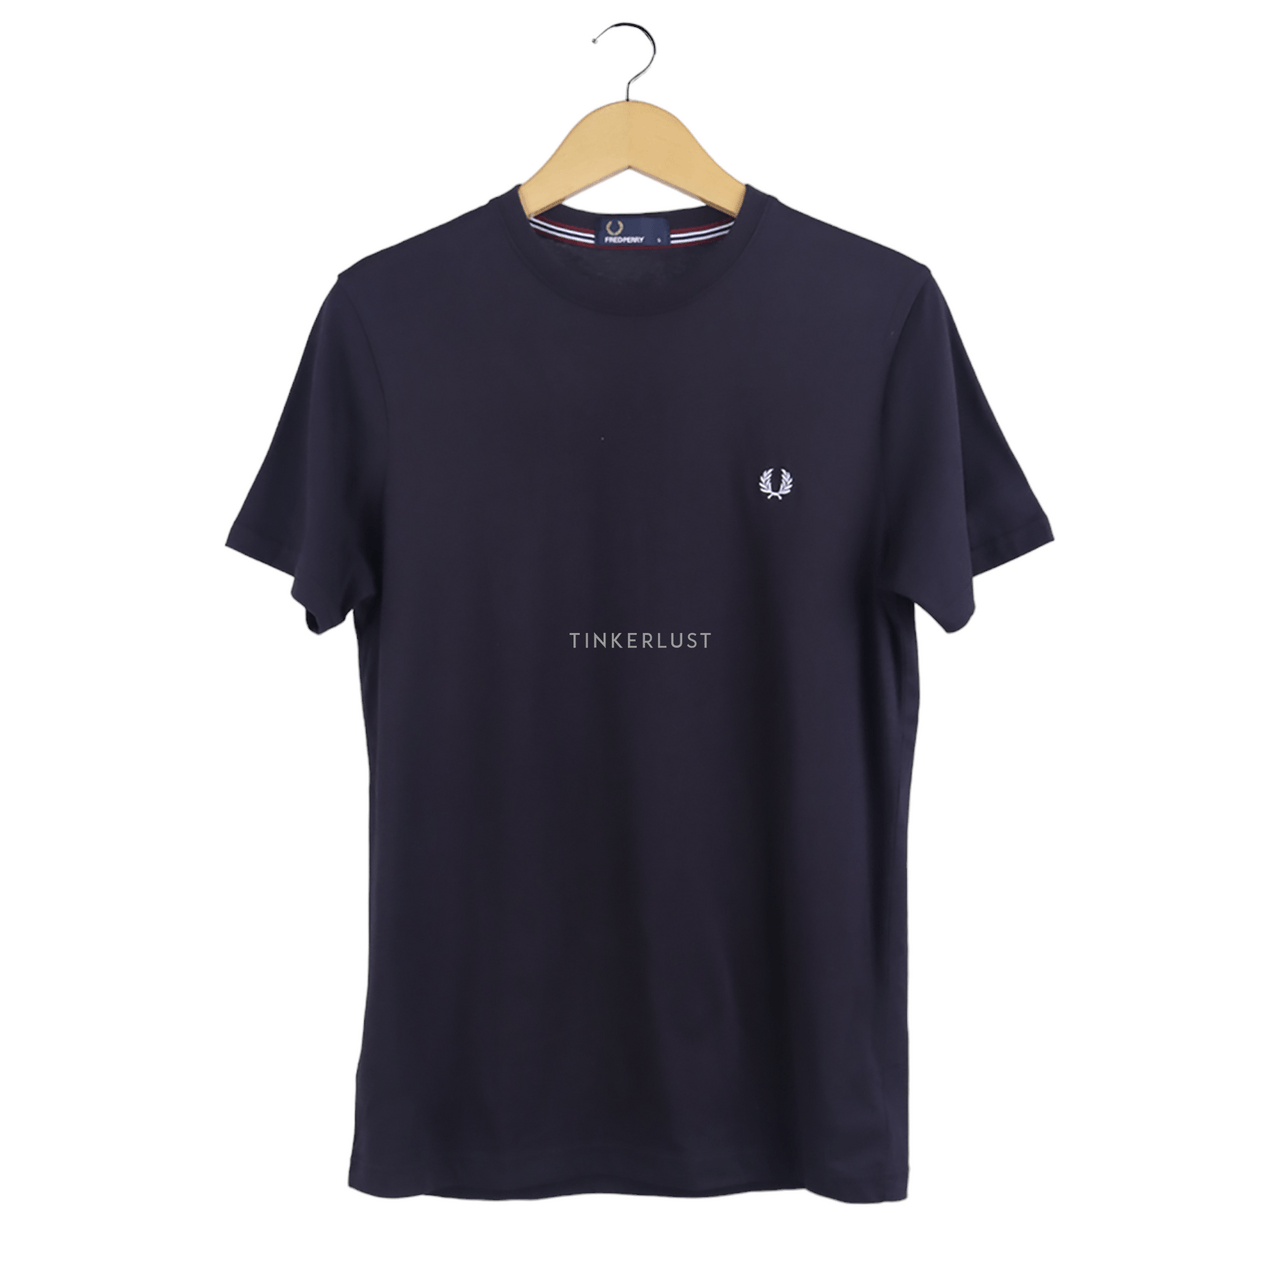 Fred Perry Black T-shirt